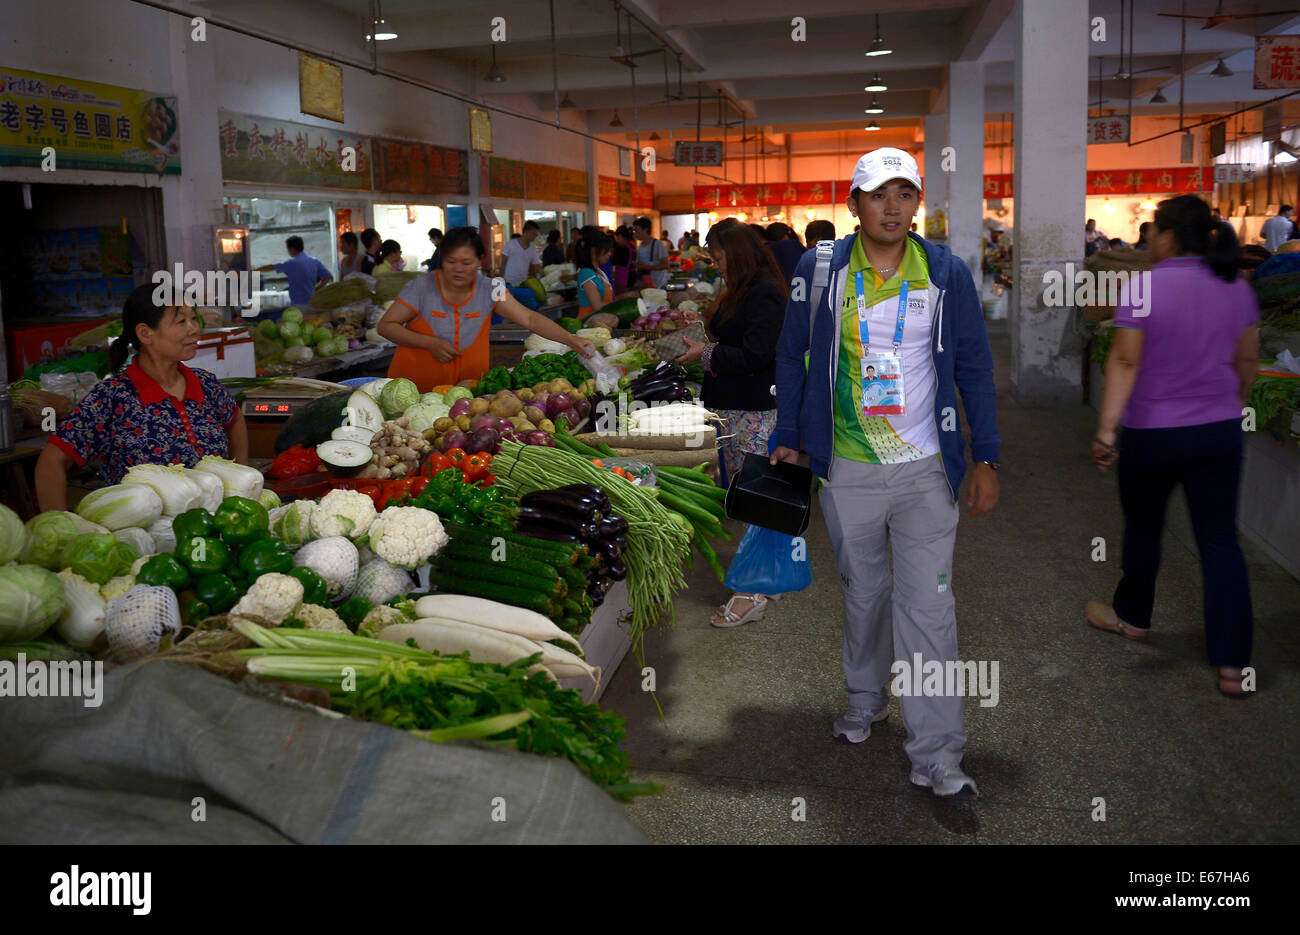 (140817) -- NANJING, Aug. 17, 2014 (Xinhua) -- Medeu Askhatuly walks in a market to buy food for his dinner during Nanjing 2014 Youth Olympic Games on Aug. 17, 2014.       21-year-old Medeu Askhatuly from Kazahkstan works as a volunteer of language service for cycling event during the Nanjing 2014 Youth Olympic Games. He is a senior student majoring in International Economics and Trade in Nanjing University of Information Science and Technology and is fluent in Kazakh, Russian, English and Chinese. He came to China with his father when he was a child and became fascinated by Chinese culture. A Stock Photo